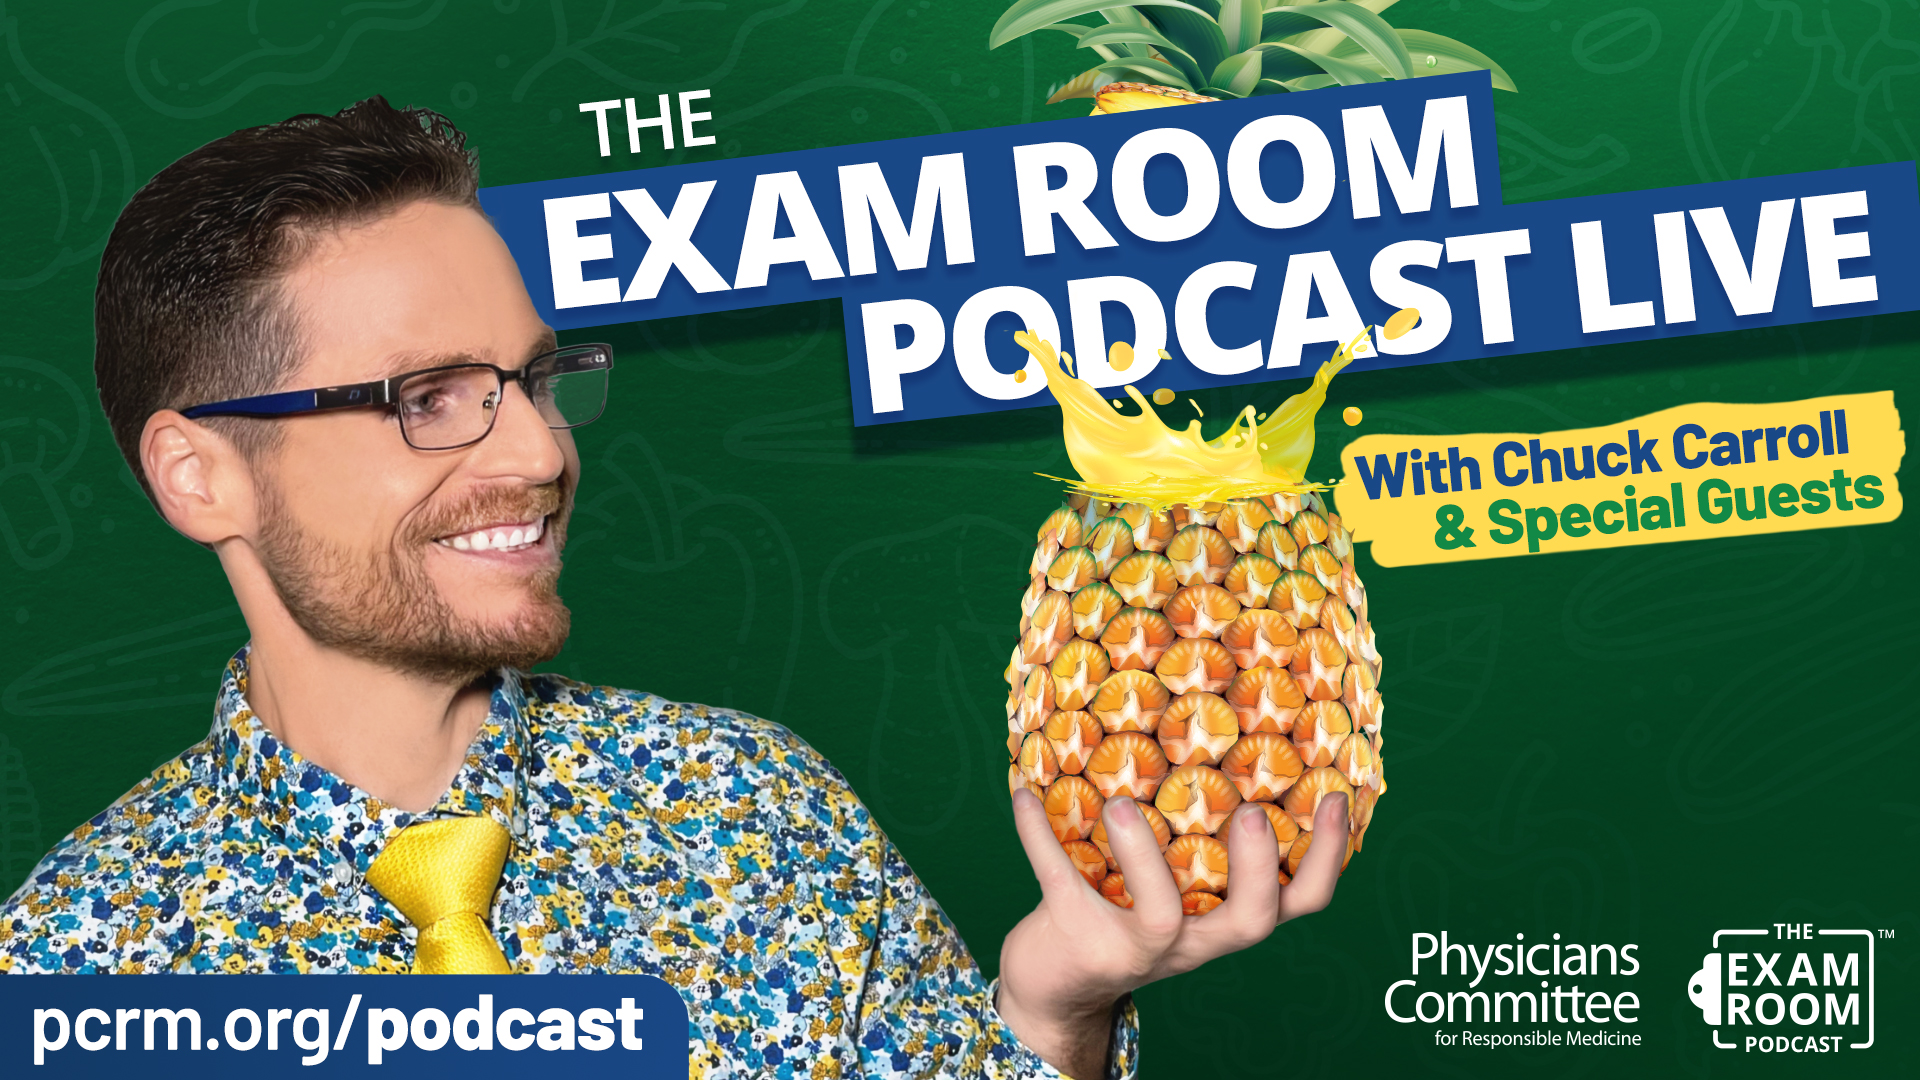 Exam Room Podcast Live With Chuck Carroll and Special Guests